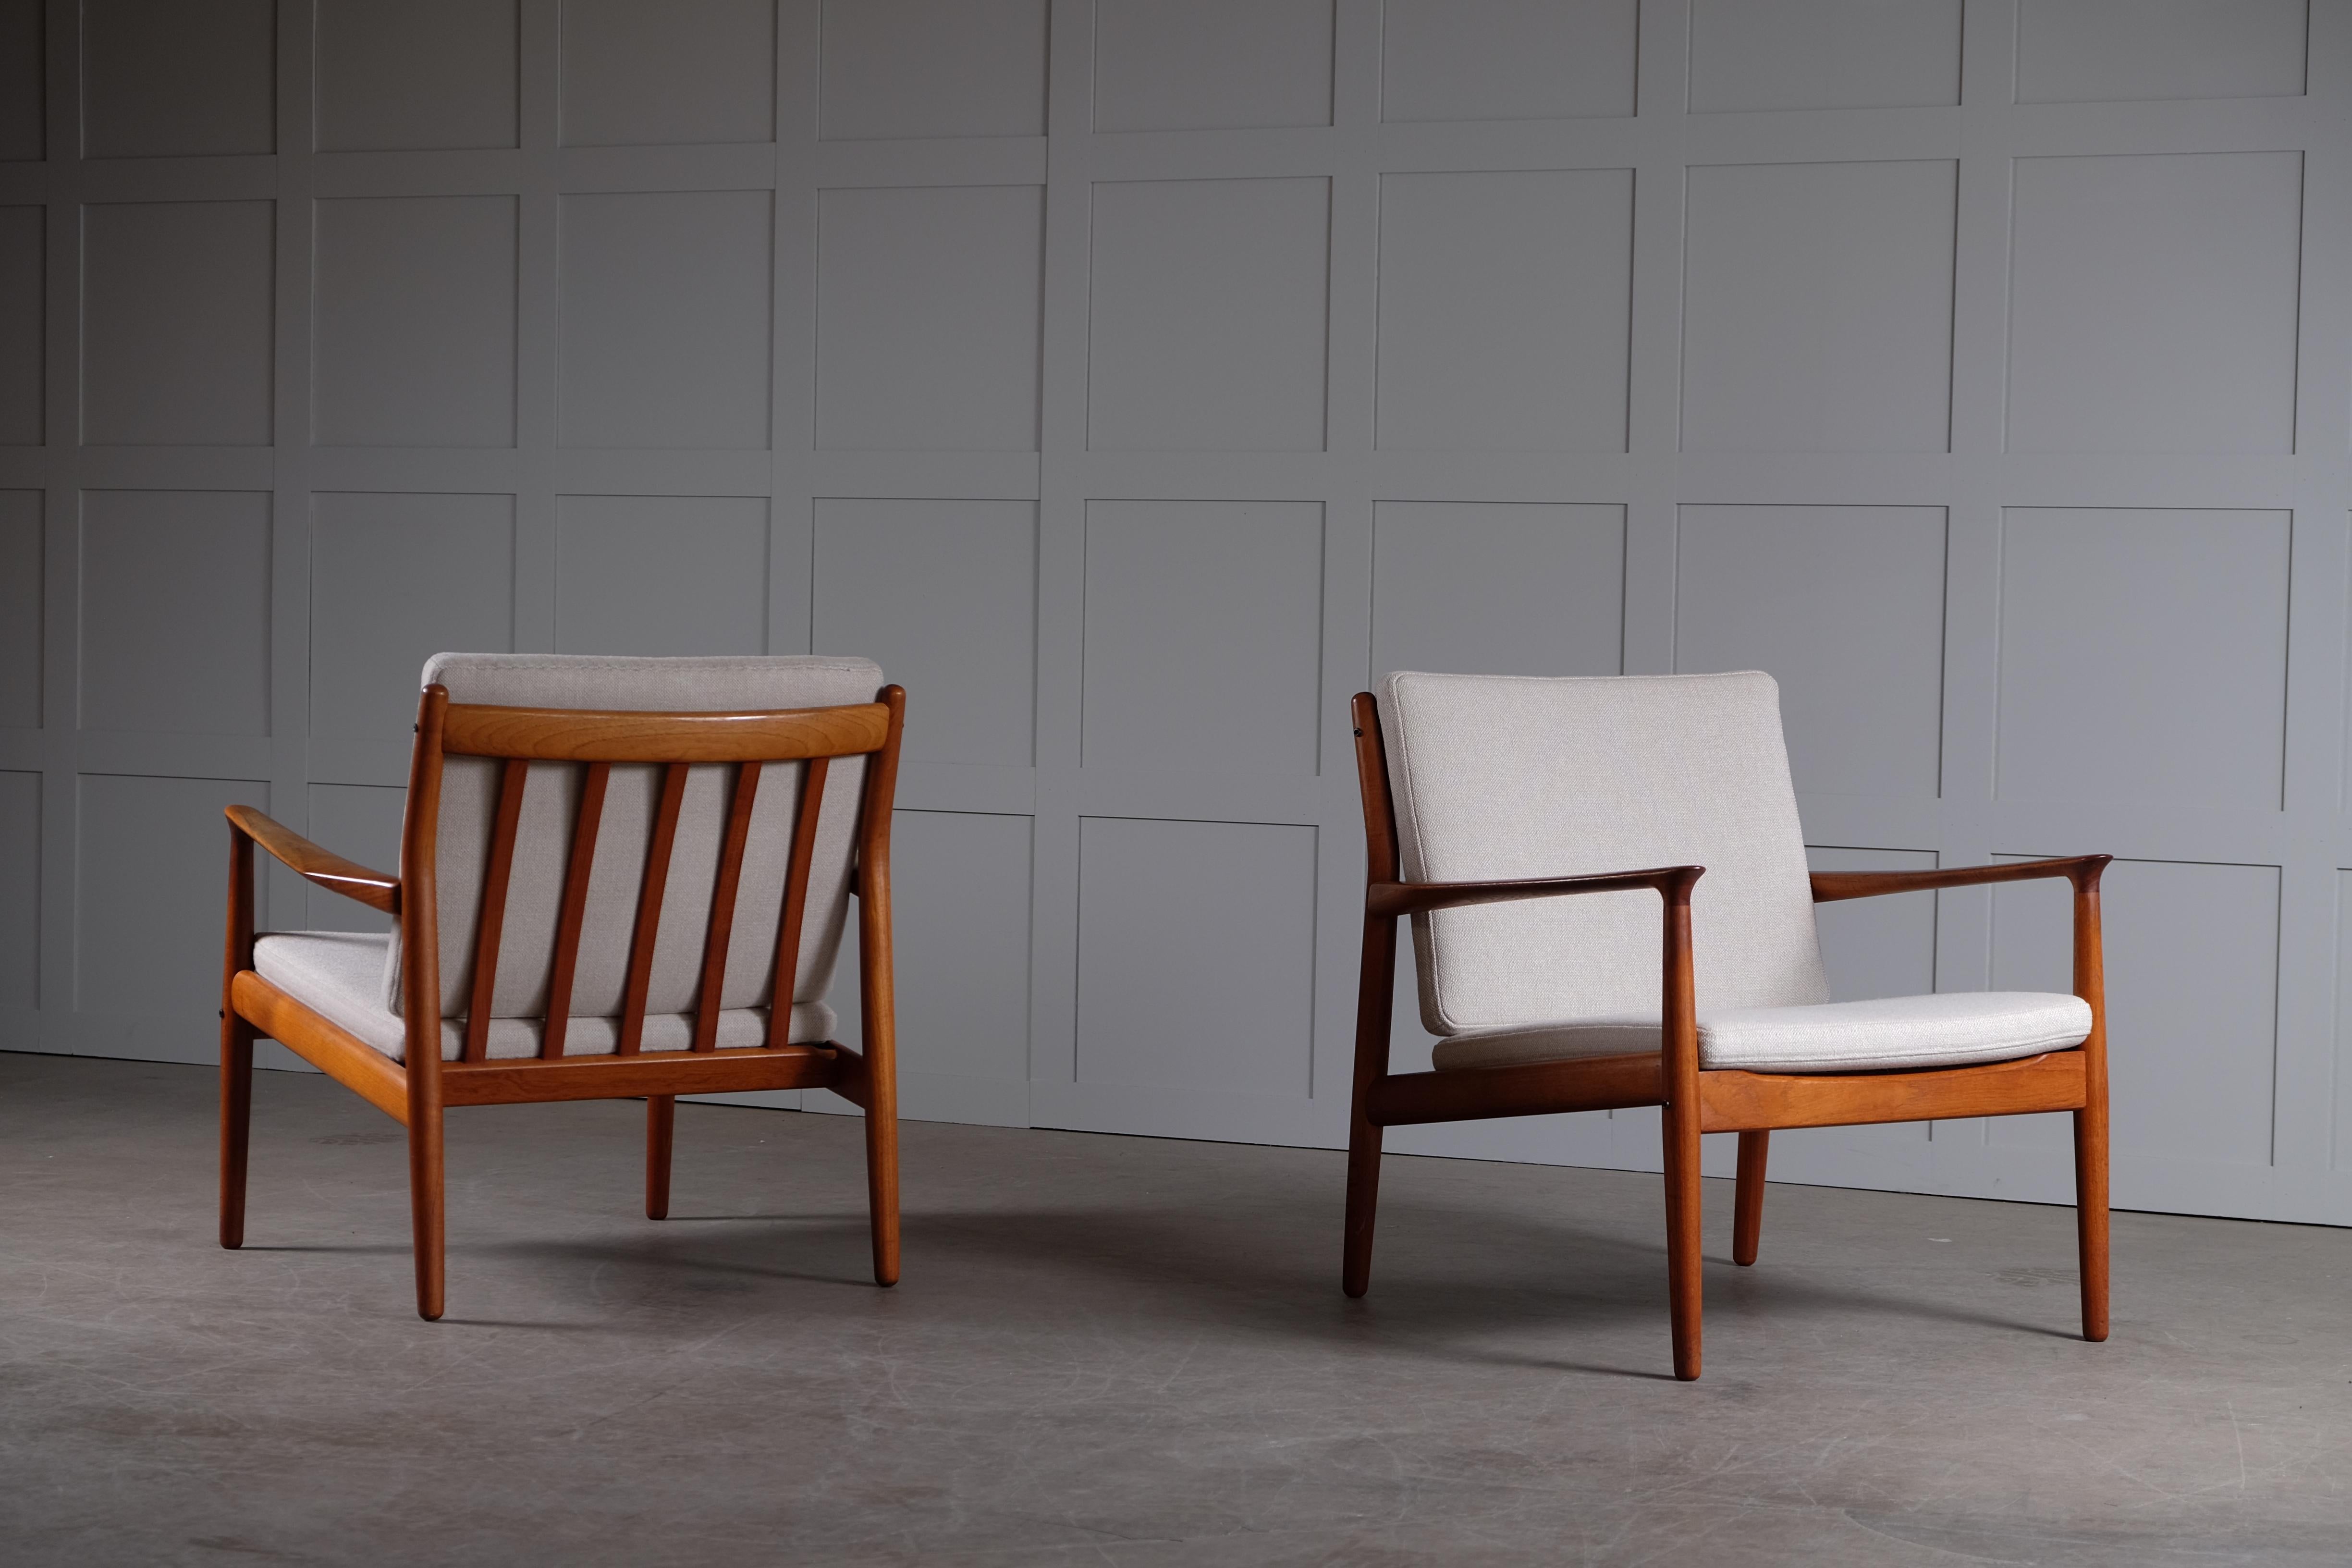 Pair of Svend Aage Eriksen easy chairs, Denmark, 1960s. Newly upholstered cushions in Hallingdal wool fabric from Kvadrat, Denmark.